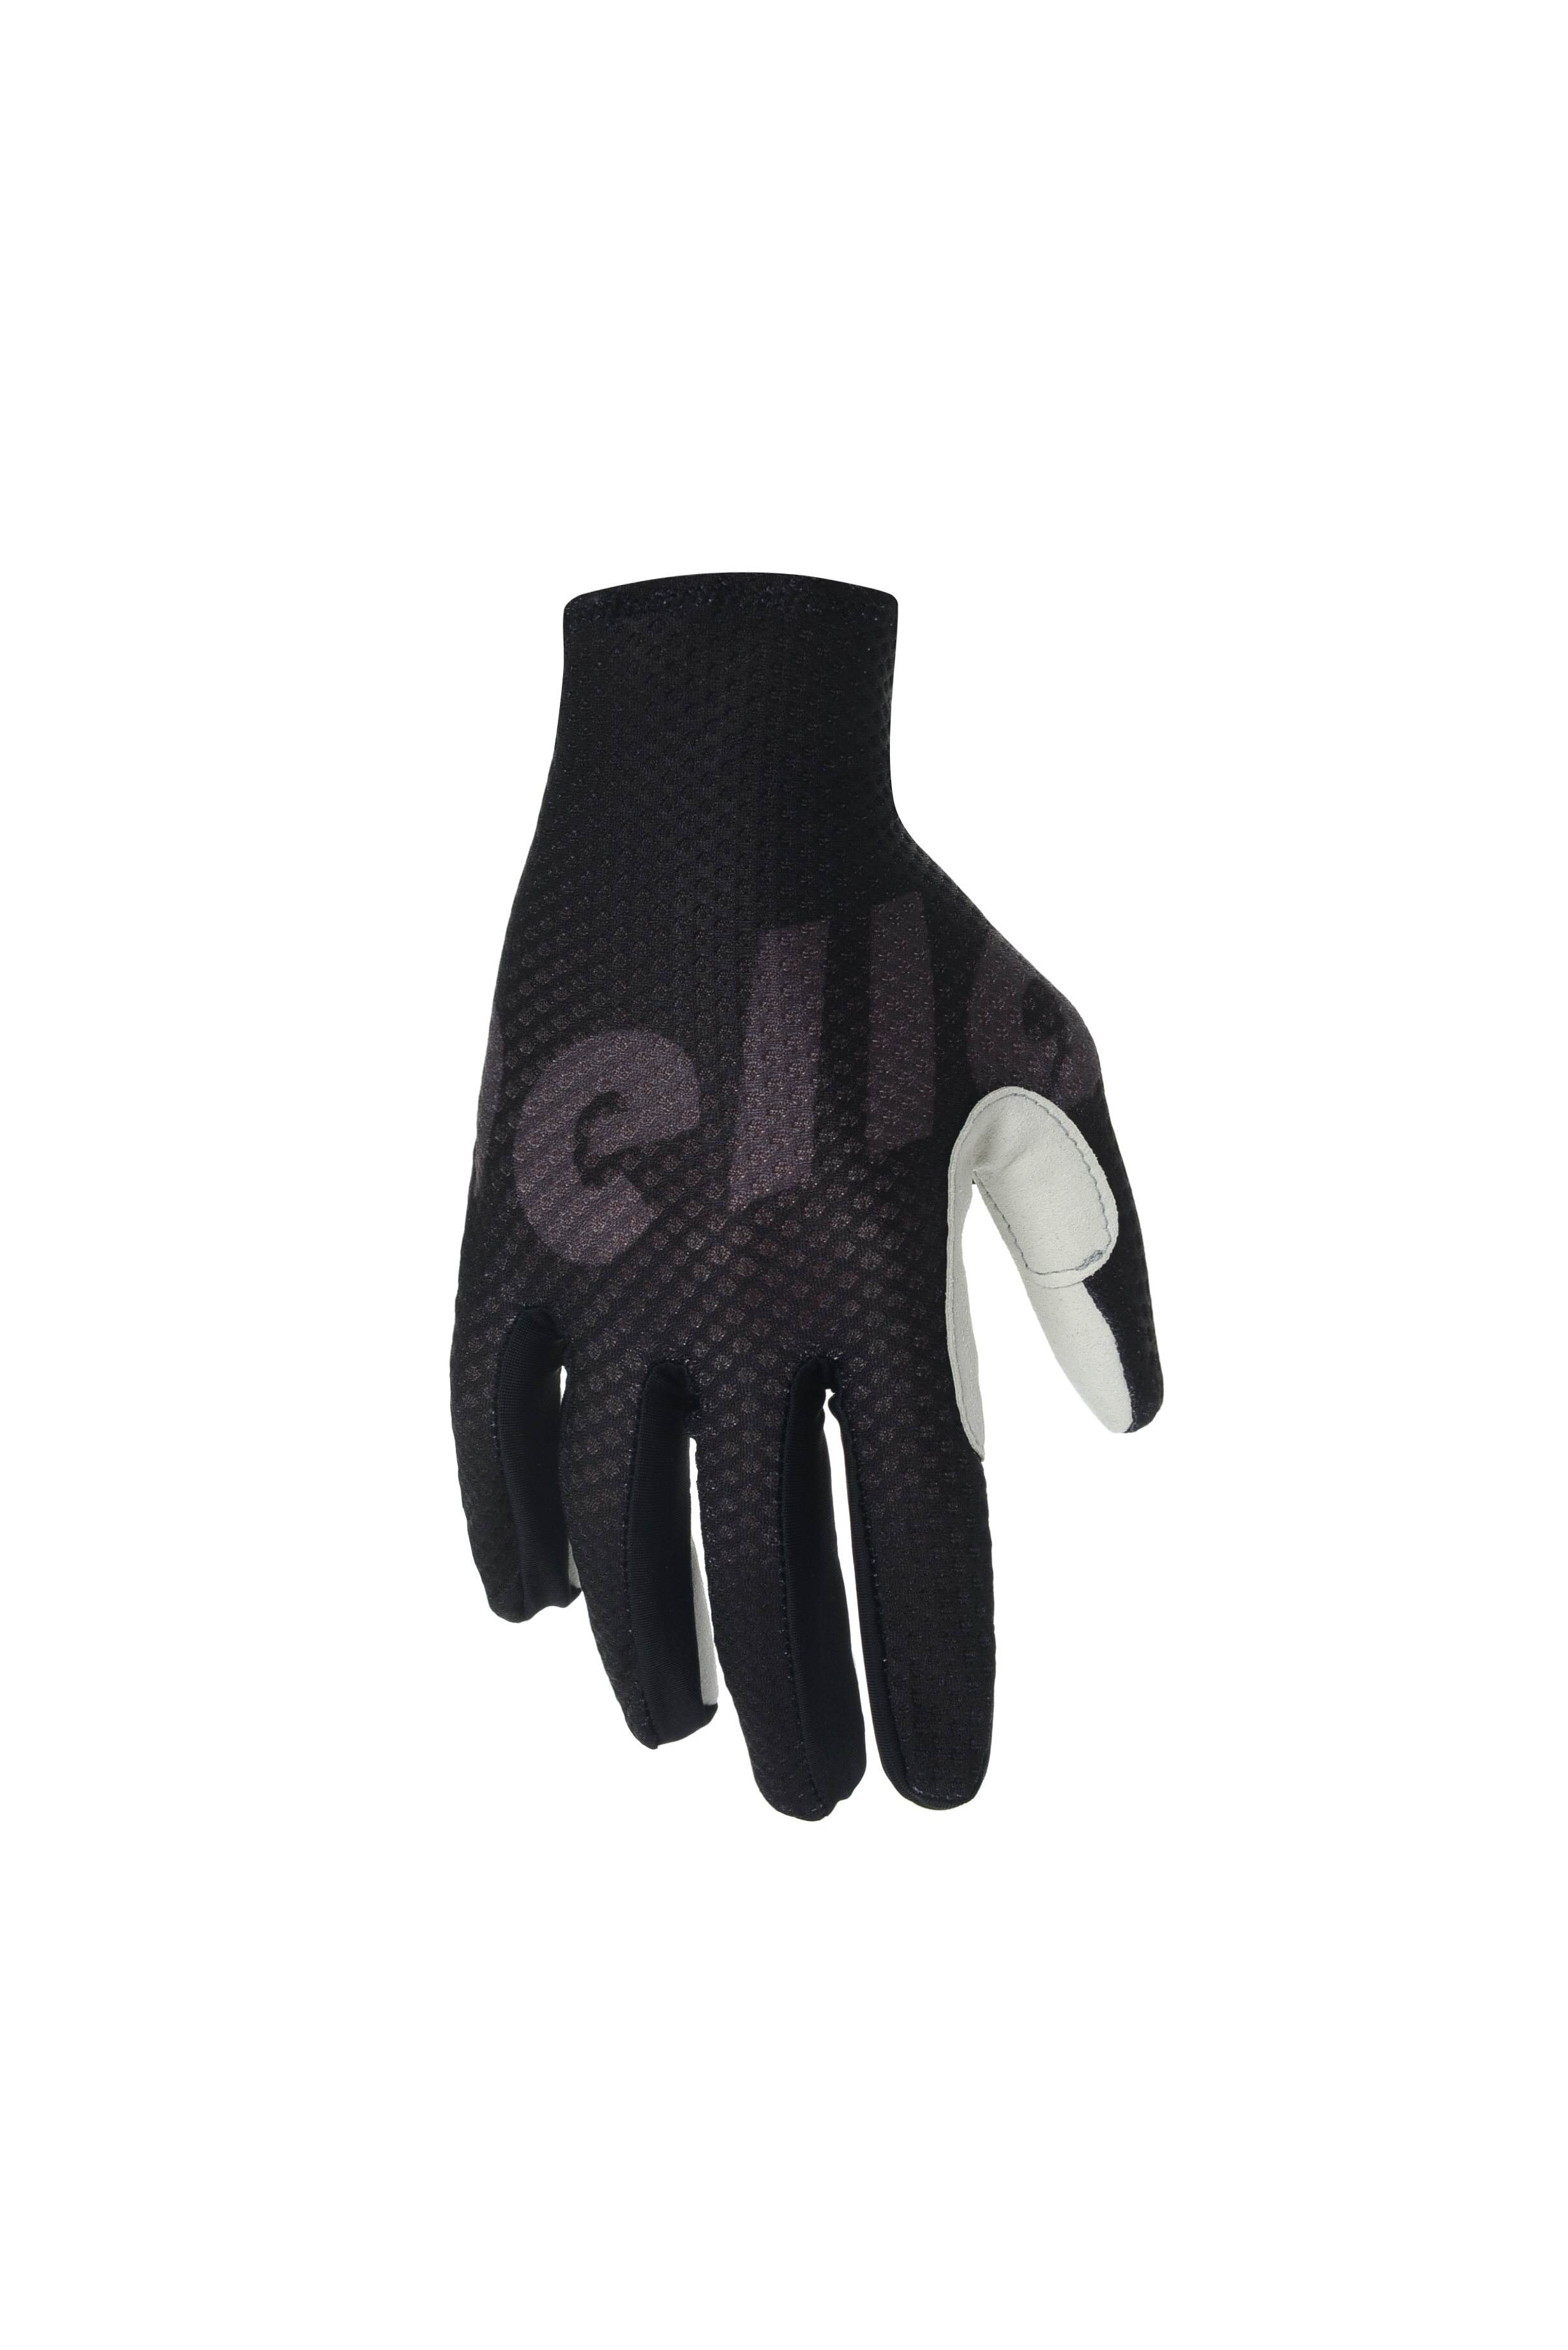 racing competizione summer gloves